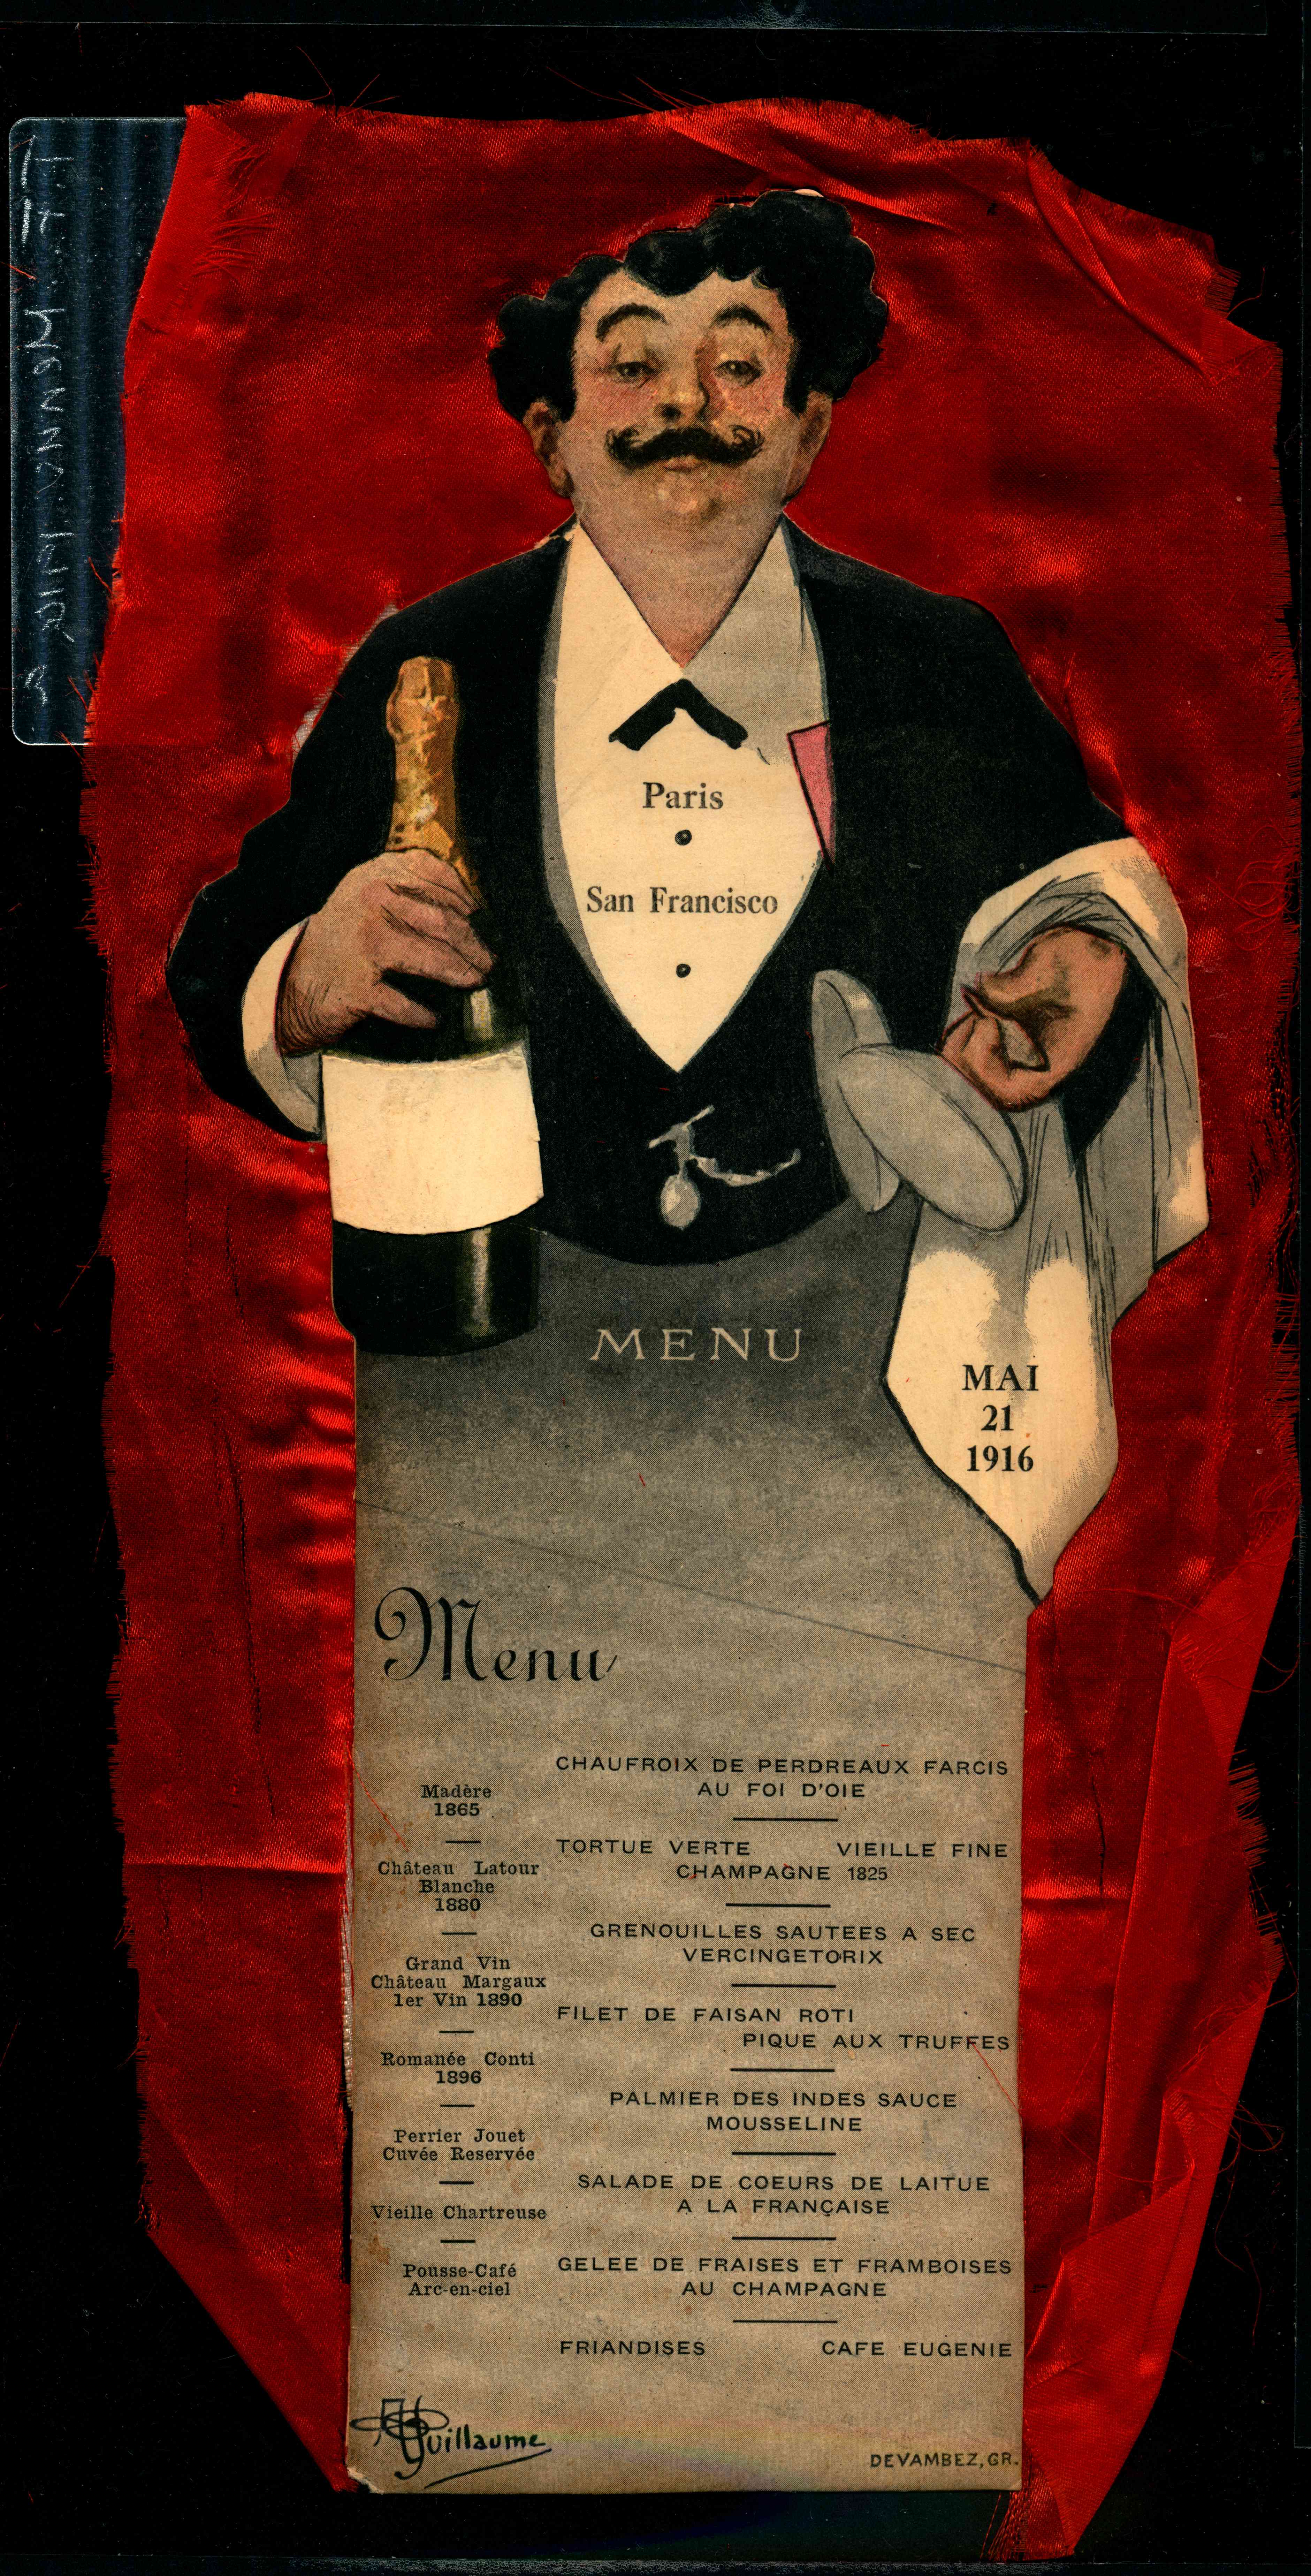 Waiter holding two champagne glasses with a bottle of chanampagne